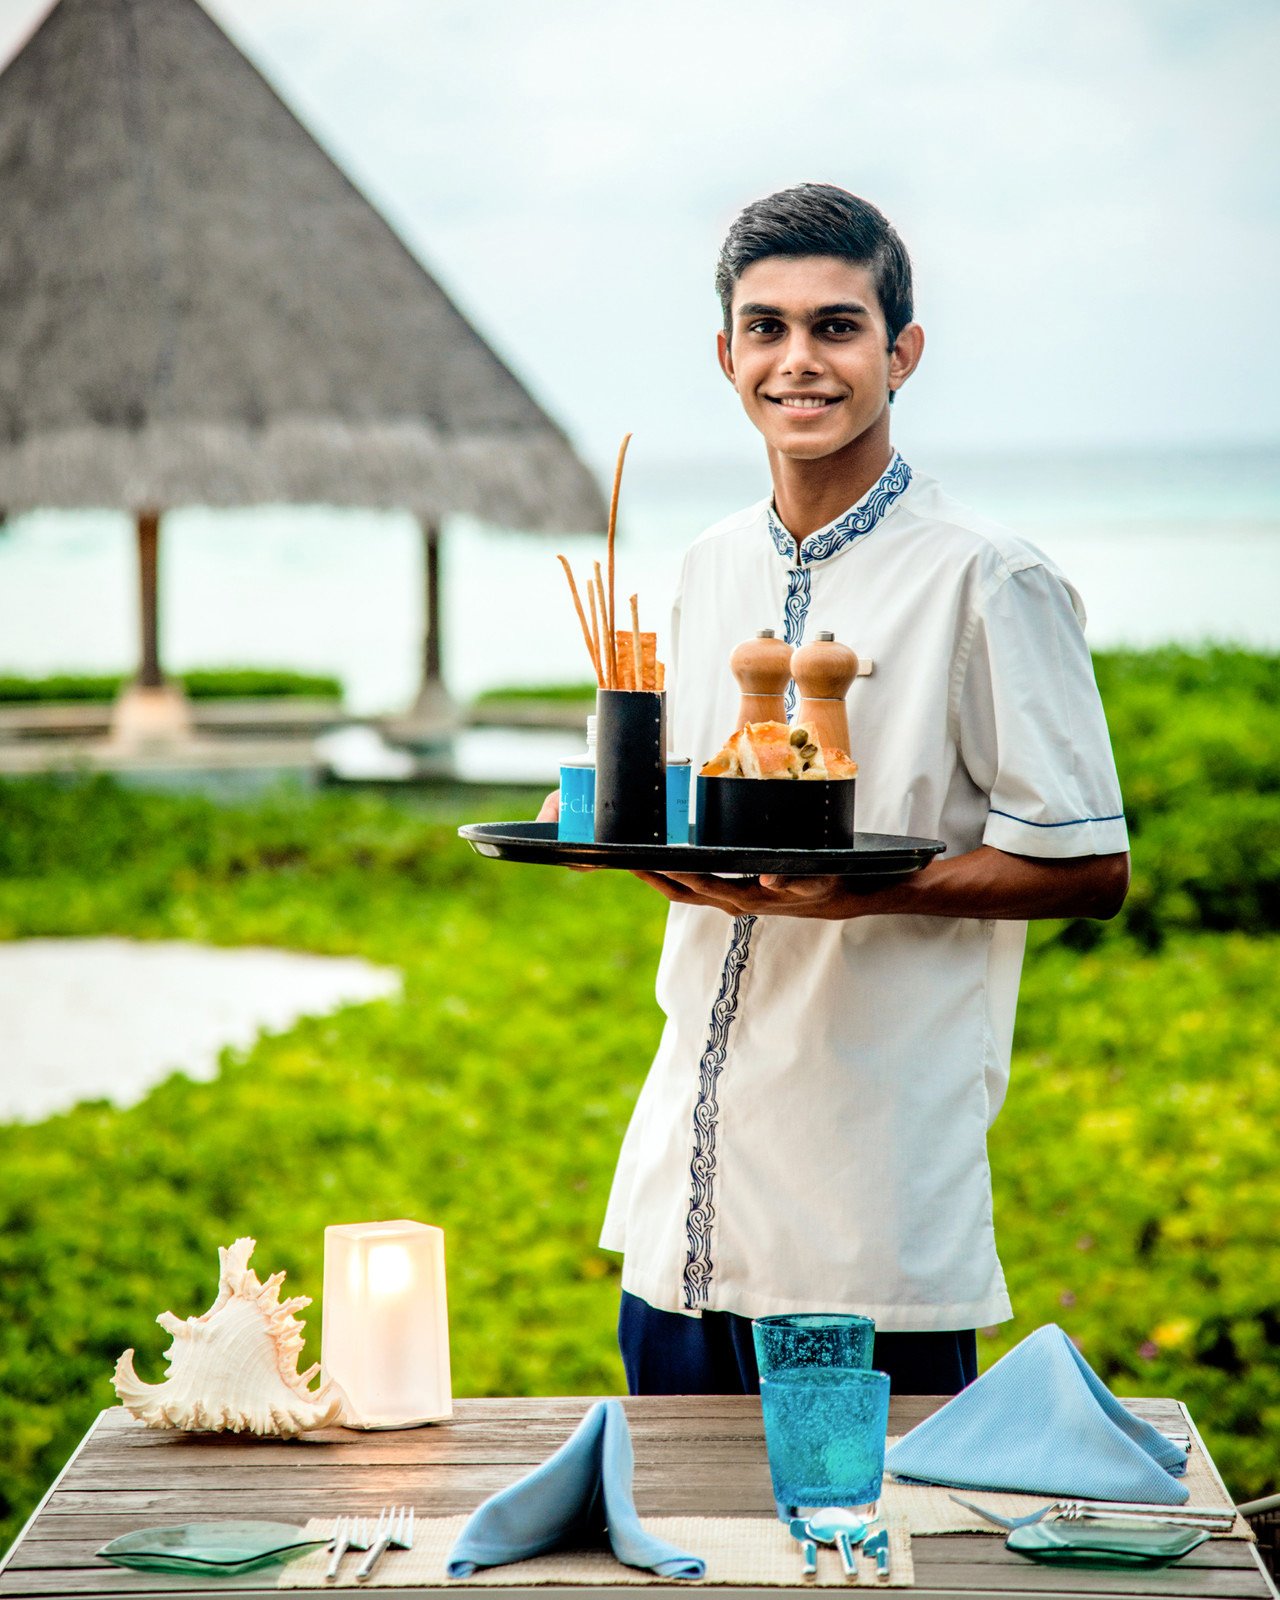 CELEBRATING THE FOUR SEASONS RESORTS MALDIVES HOSPITALITY APPRENTICES GRADUATING IN 2022 AND WELCOMING THE CLASS OF 2023